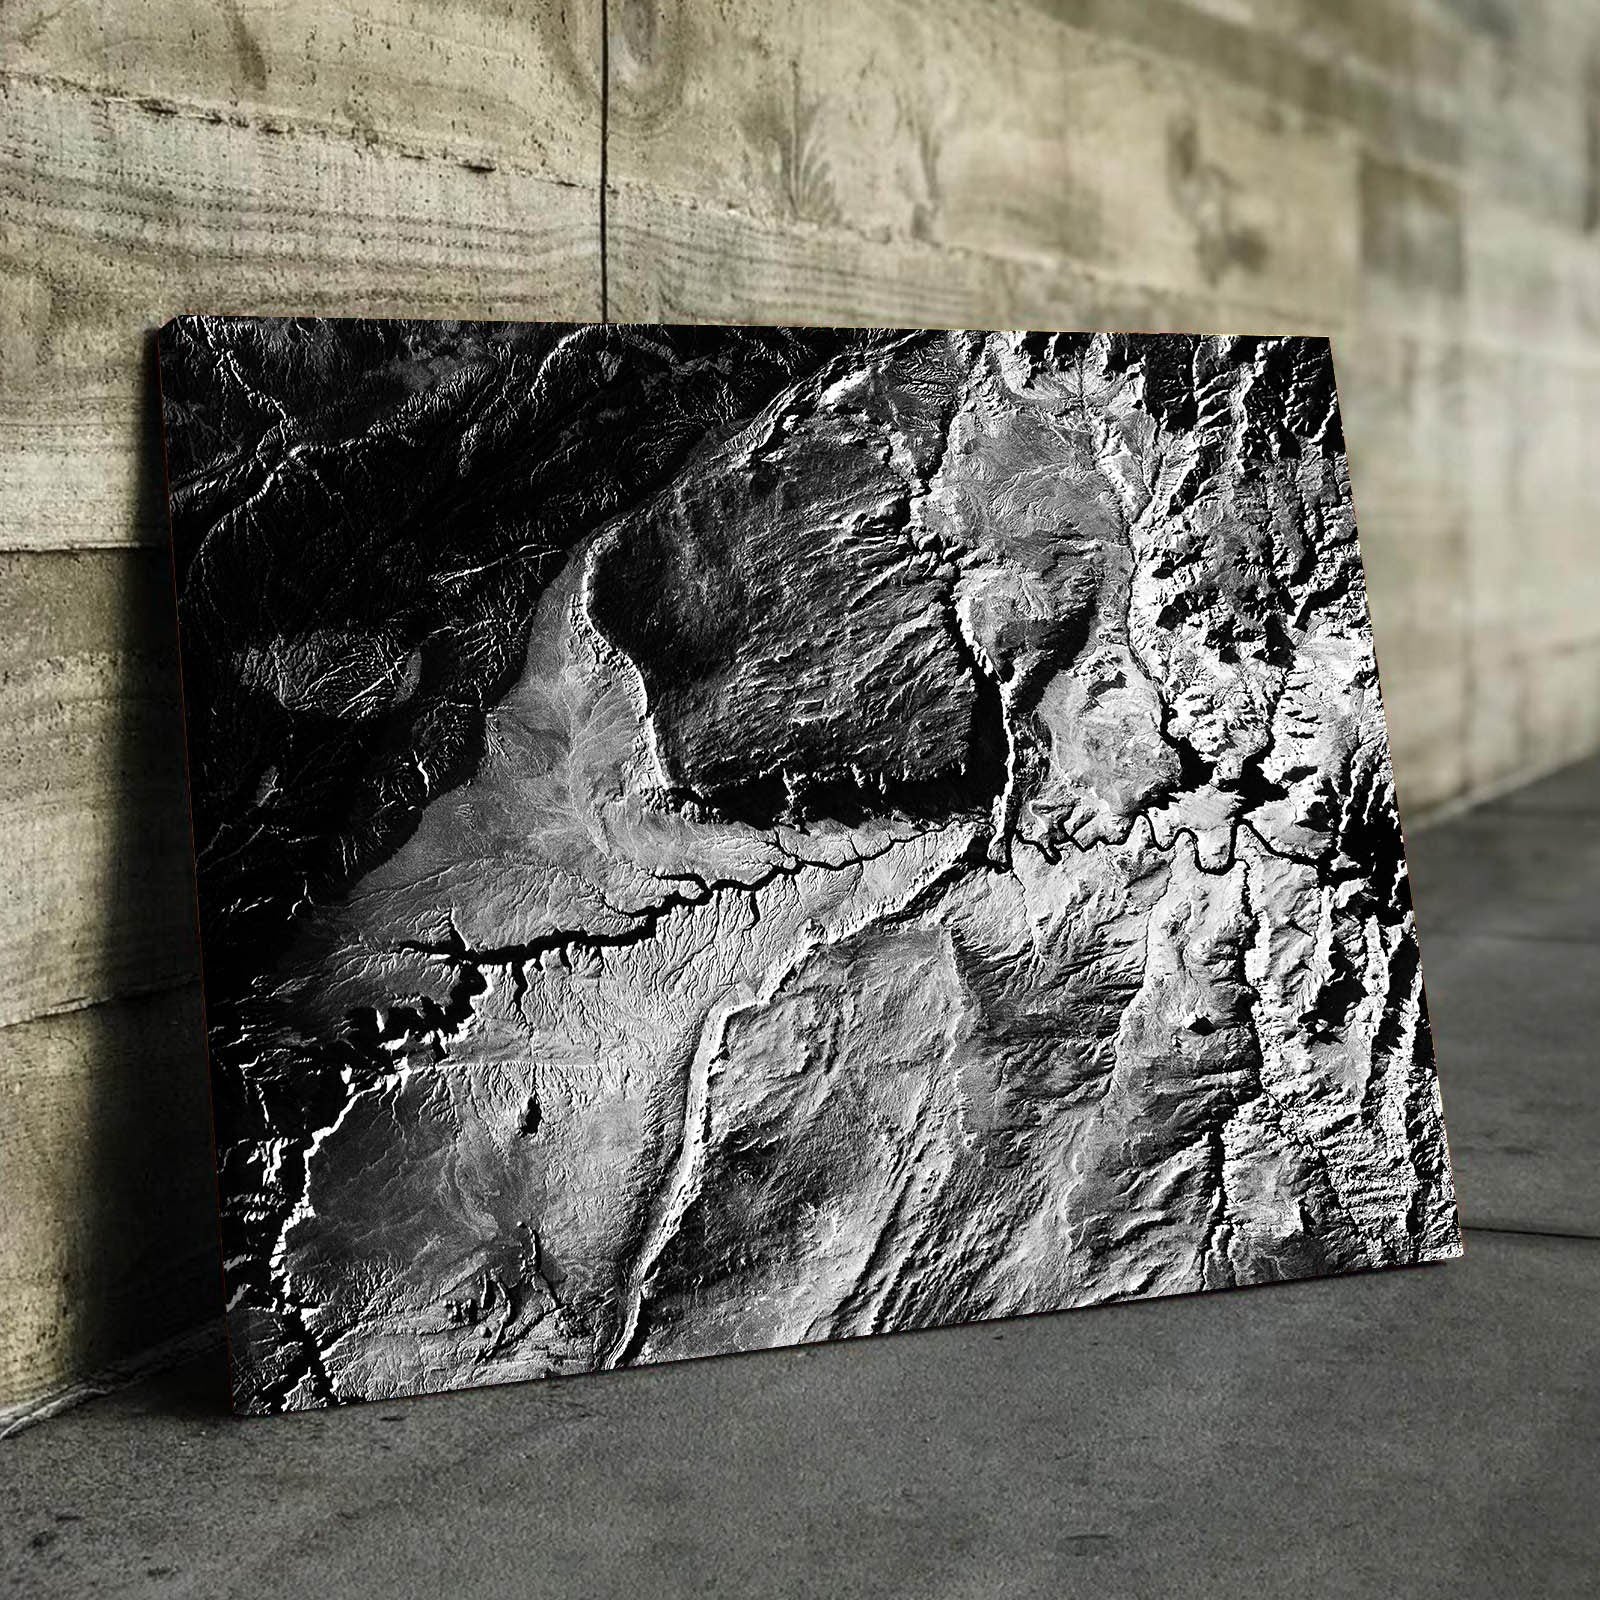 Lake Powell From Space | Monochrome 1 | Gallery Quality Canvas Wrap - Houseboat Kings